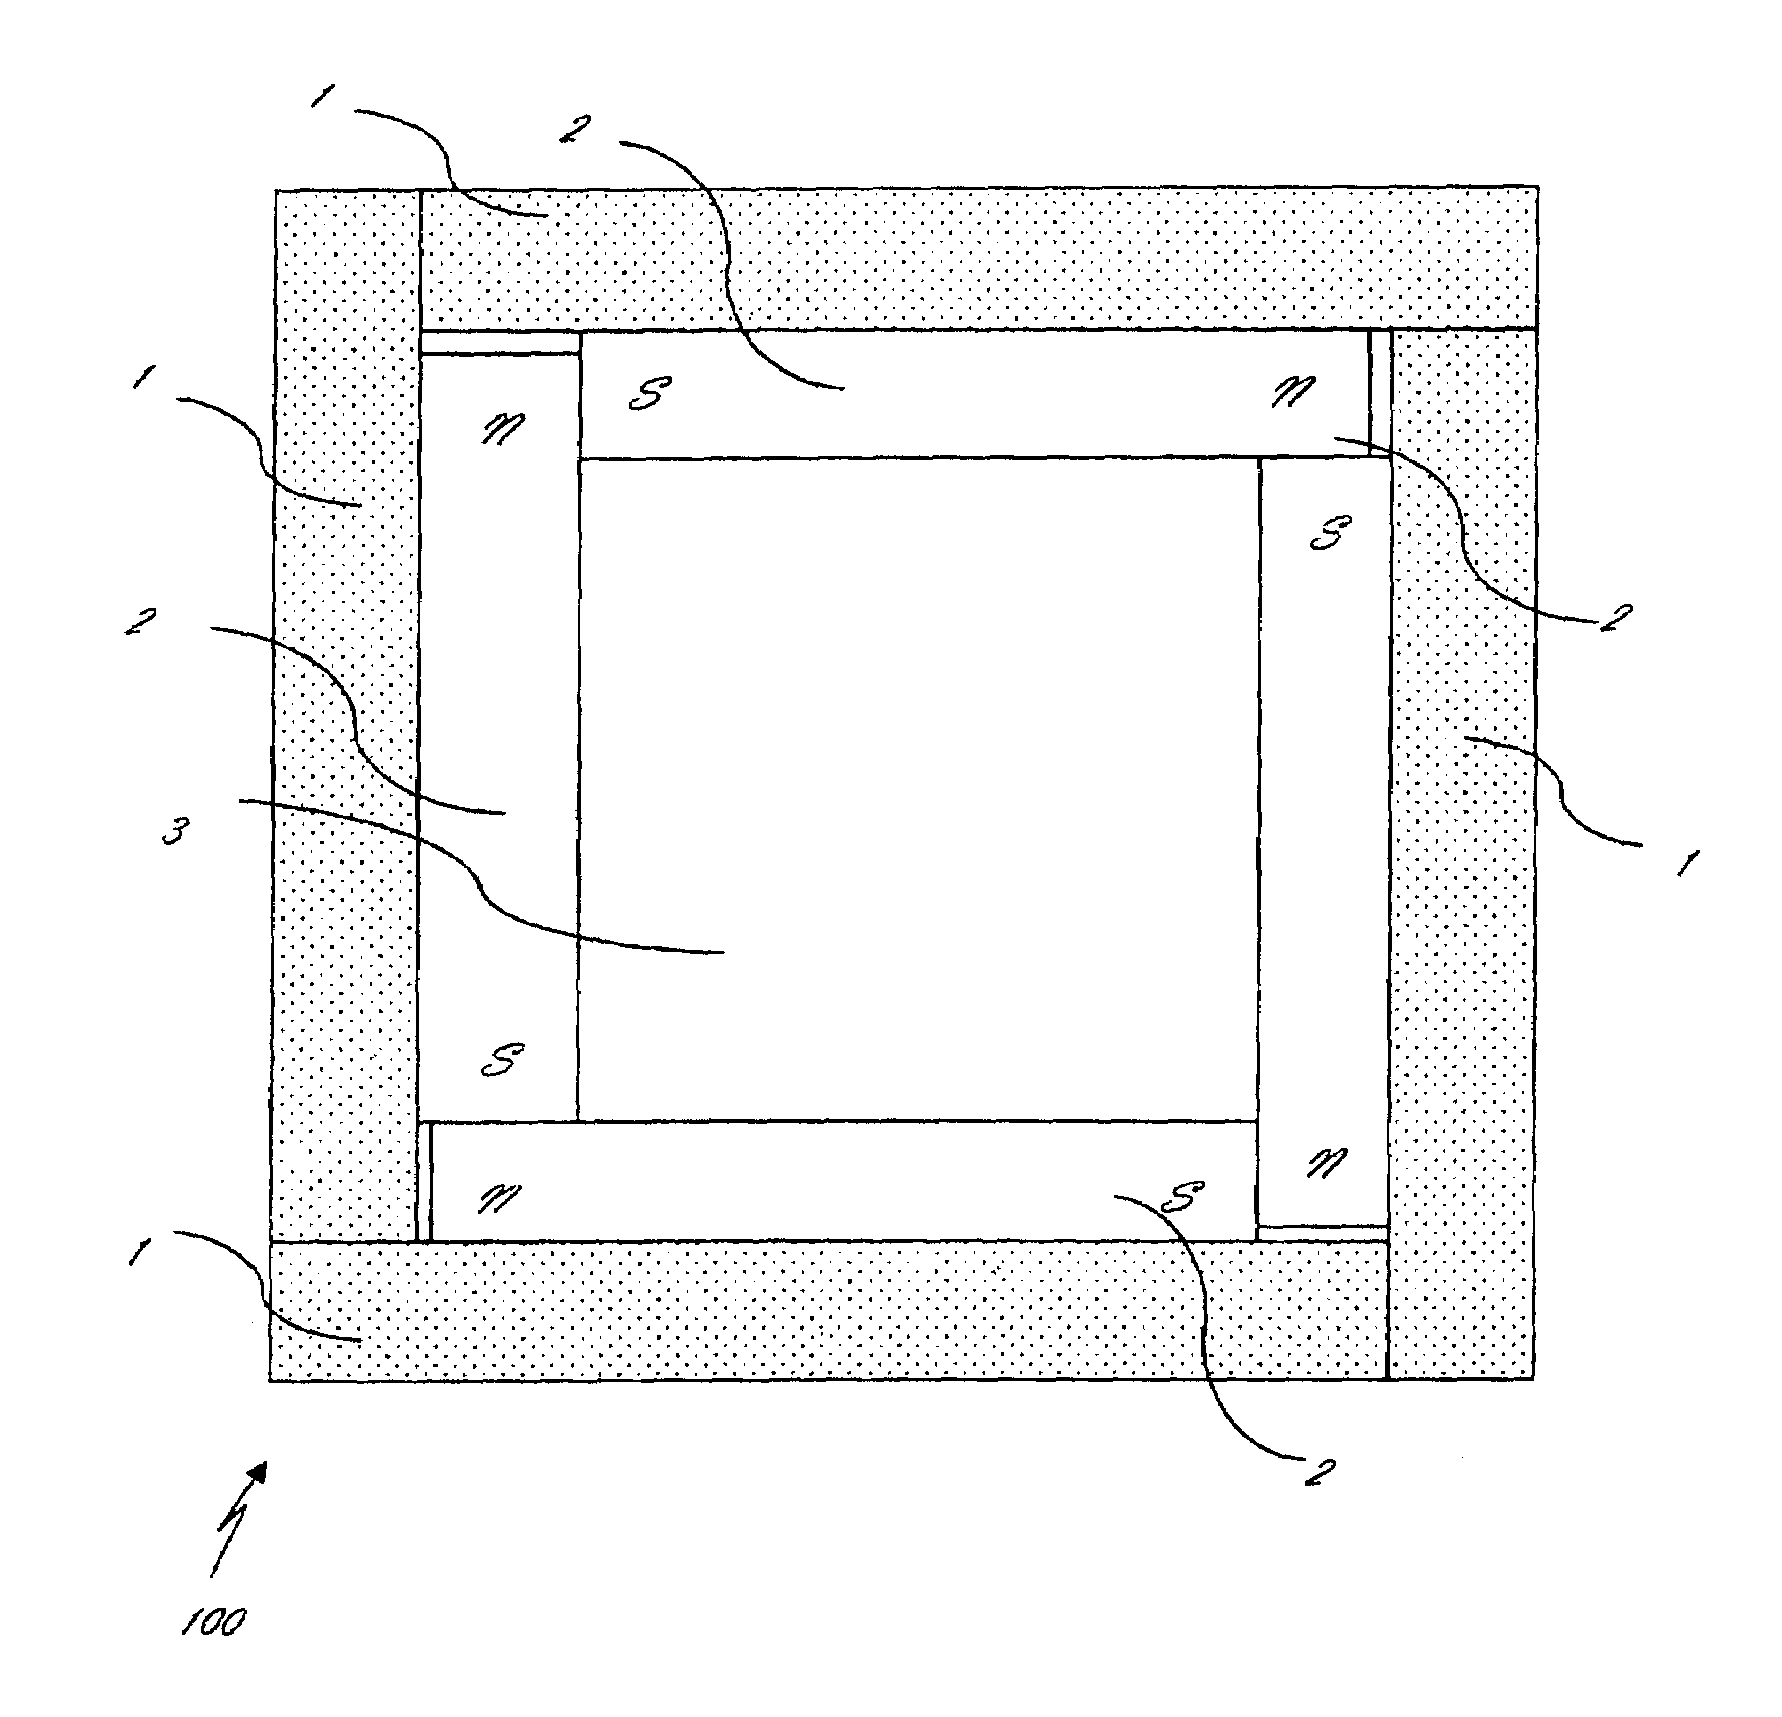 Self-fastening cage surrounding a magnetic resonance device and methods thereof